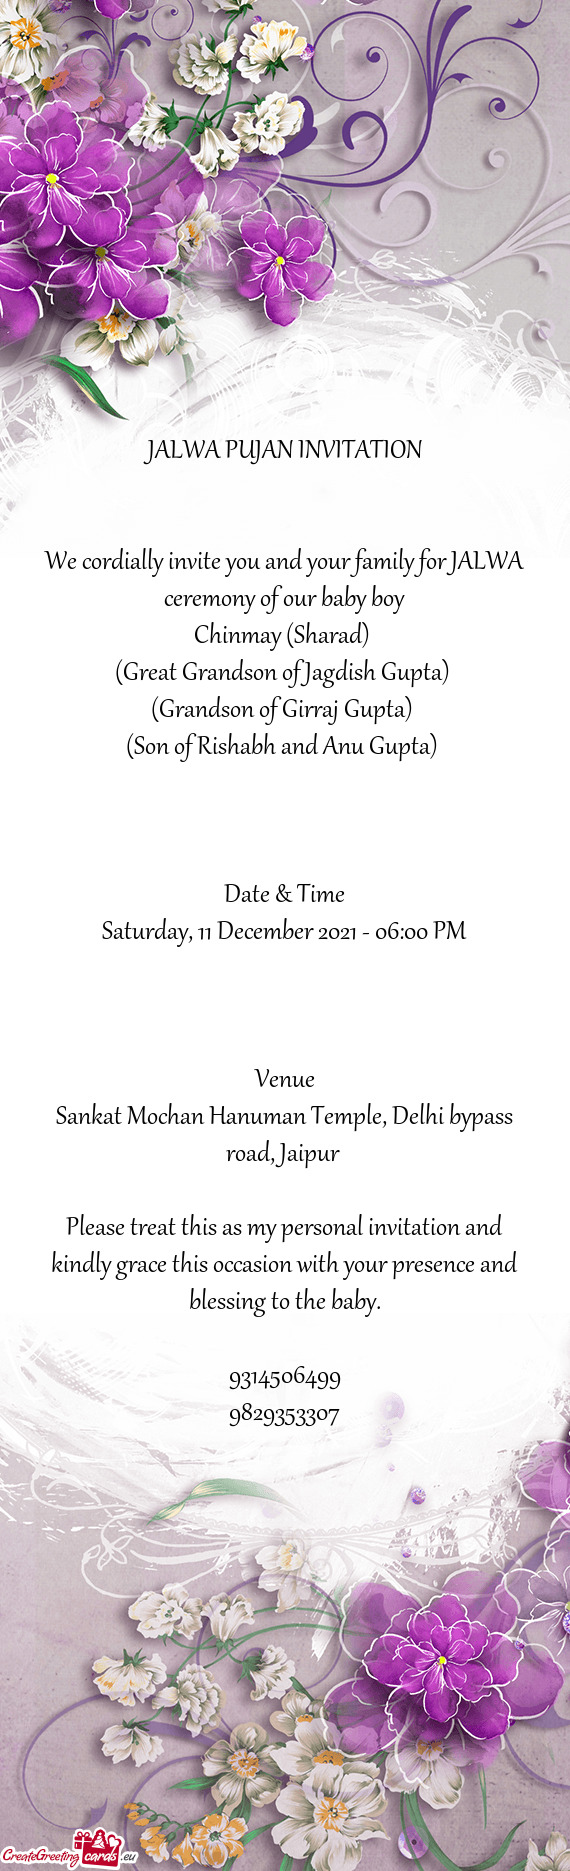 We cordially invite you and your family for JALWA ceremony of our baby boy